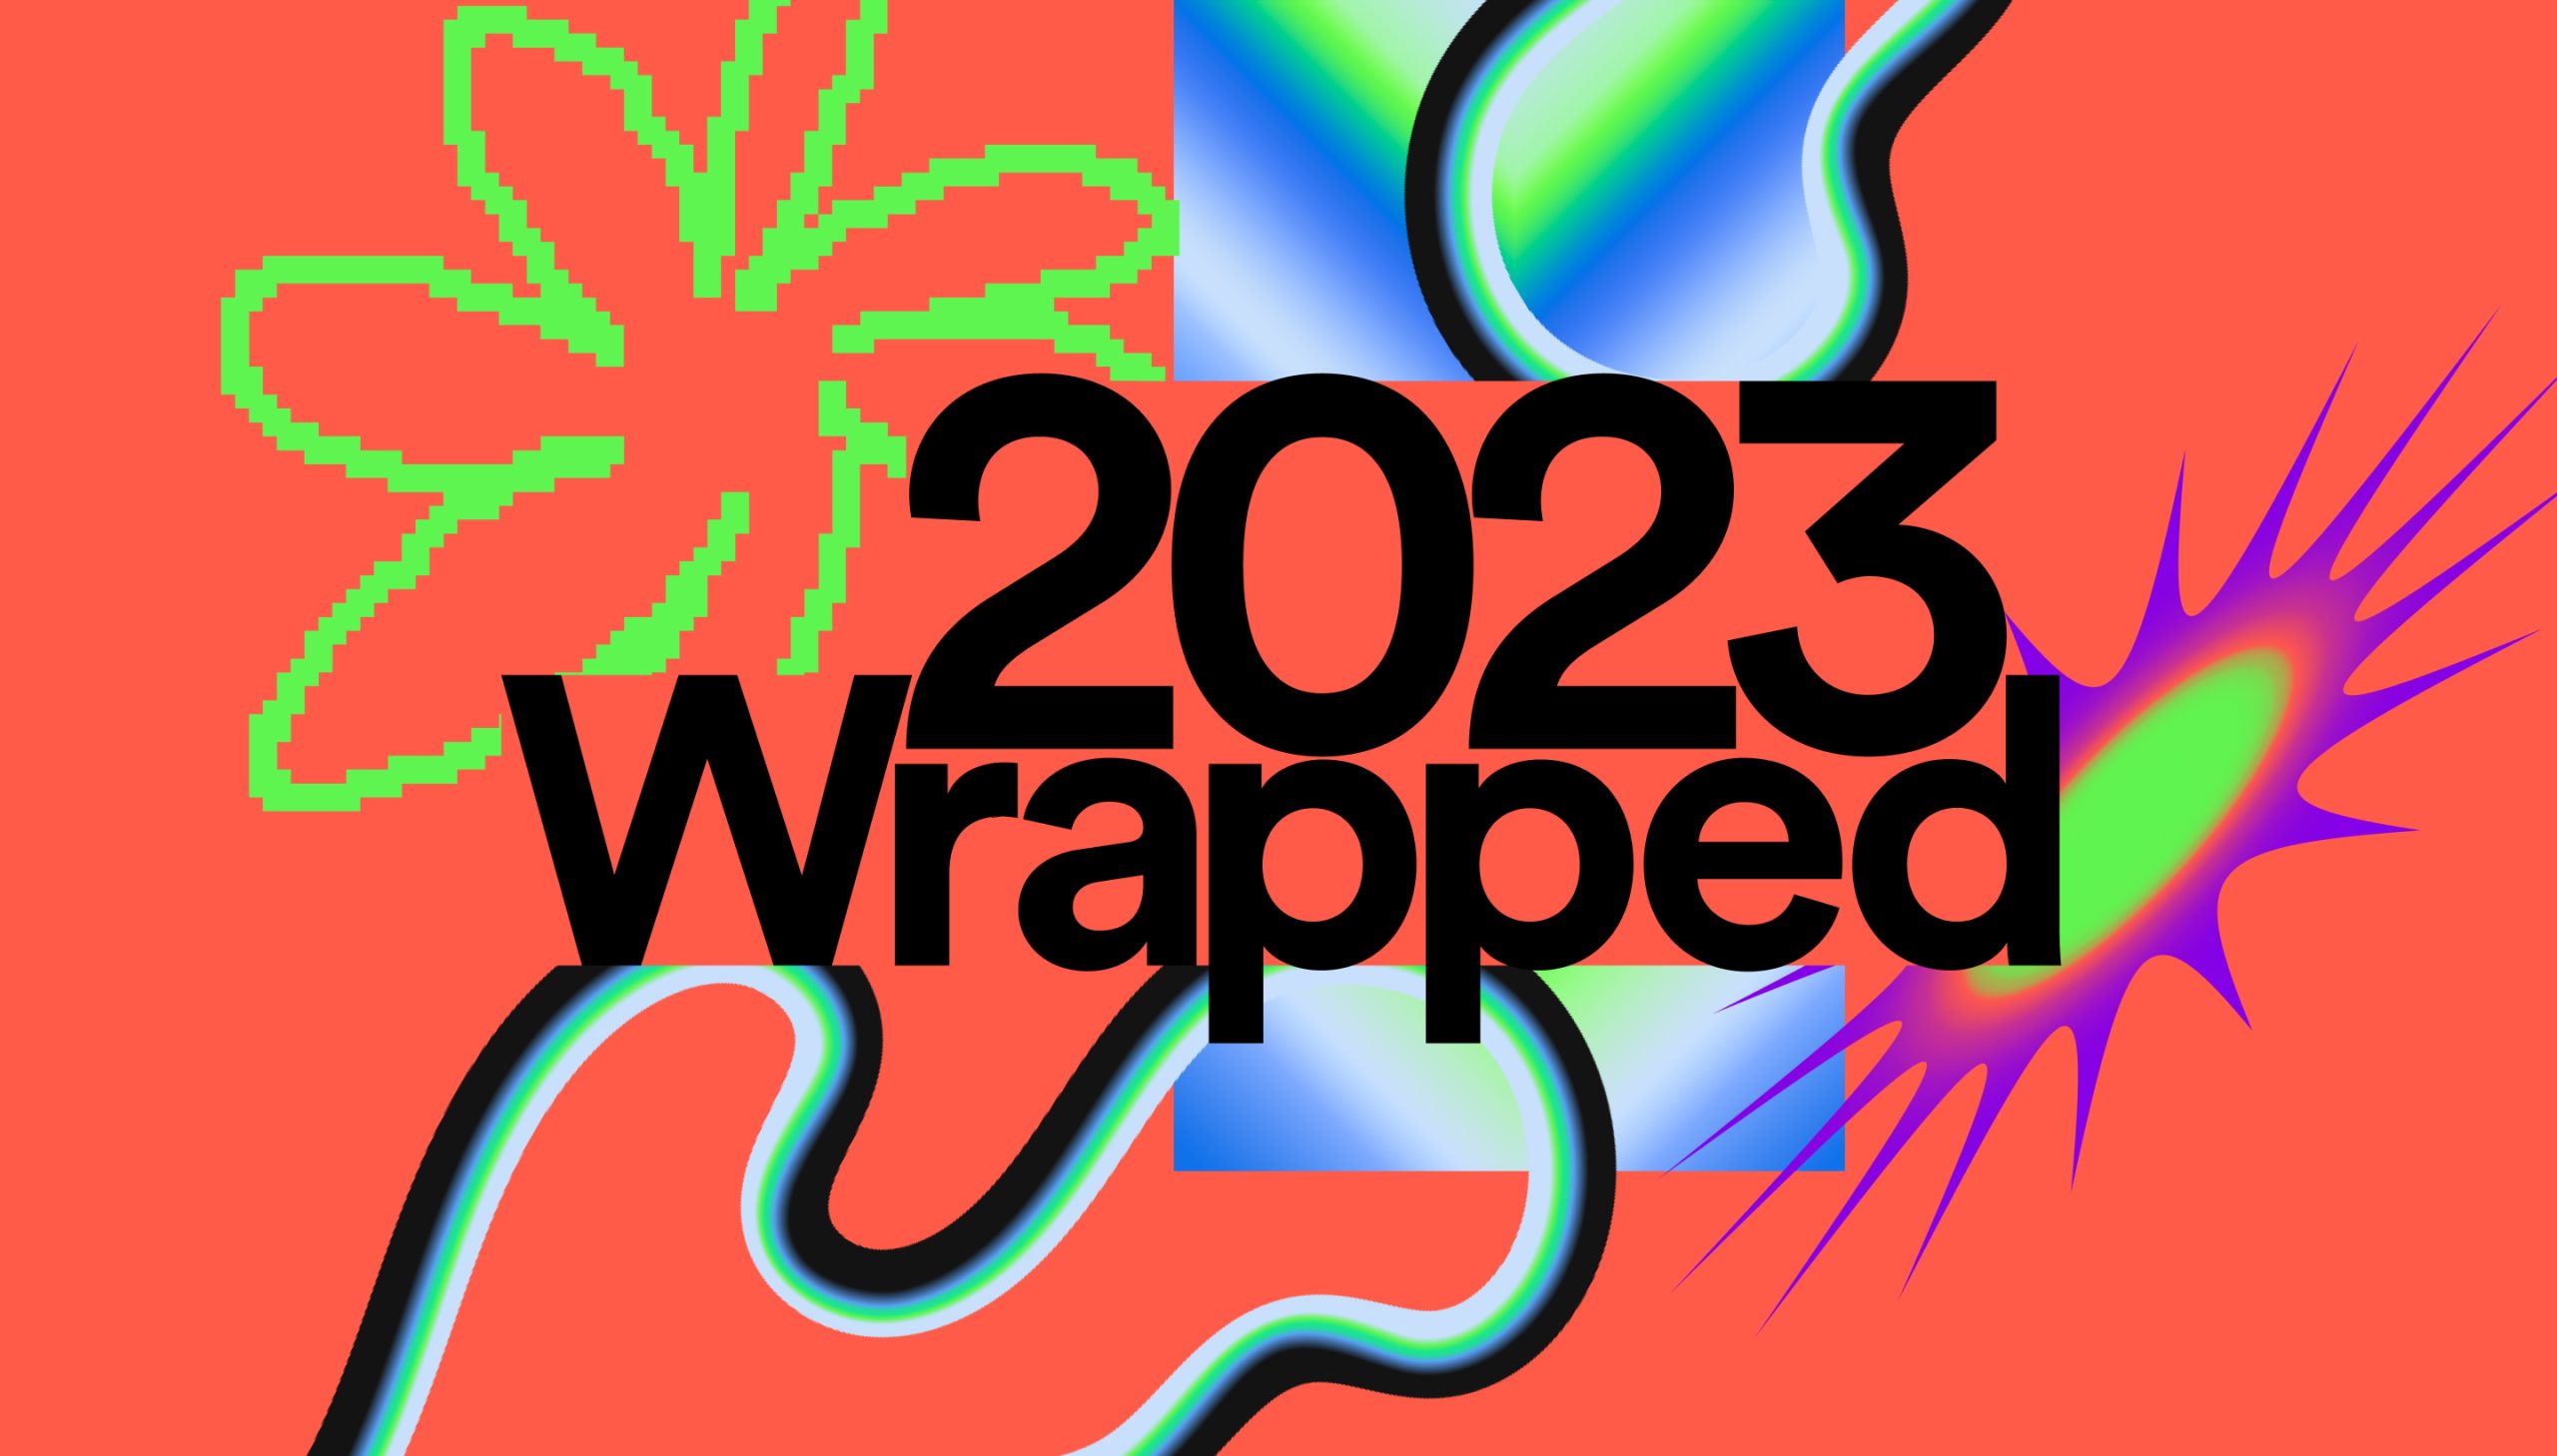 The Top Songs, Artists, Podcasts, and Listening Trends of 2023